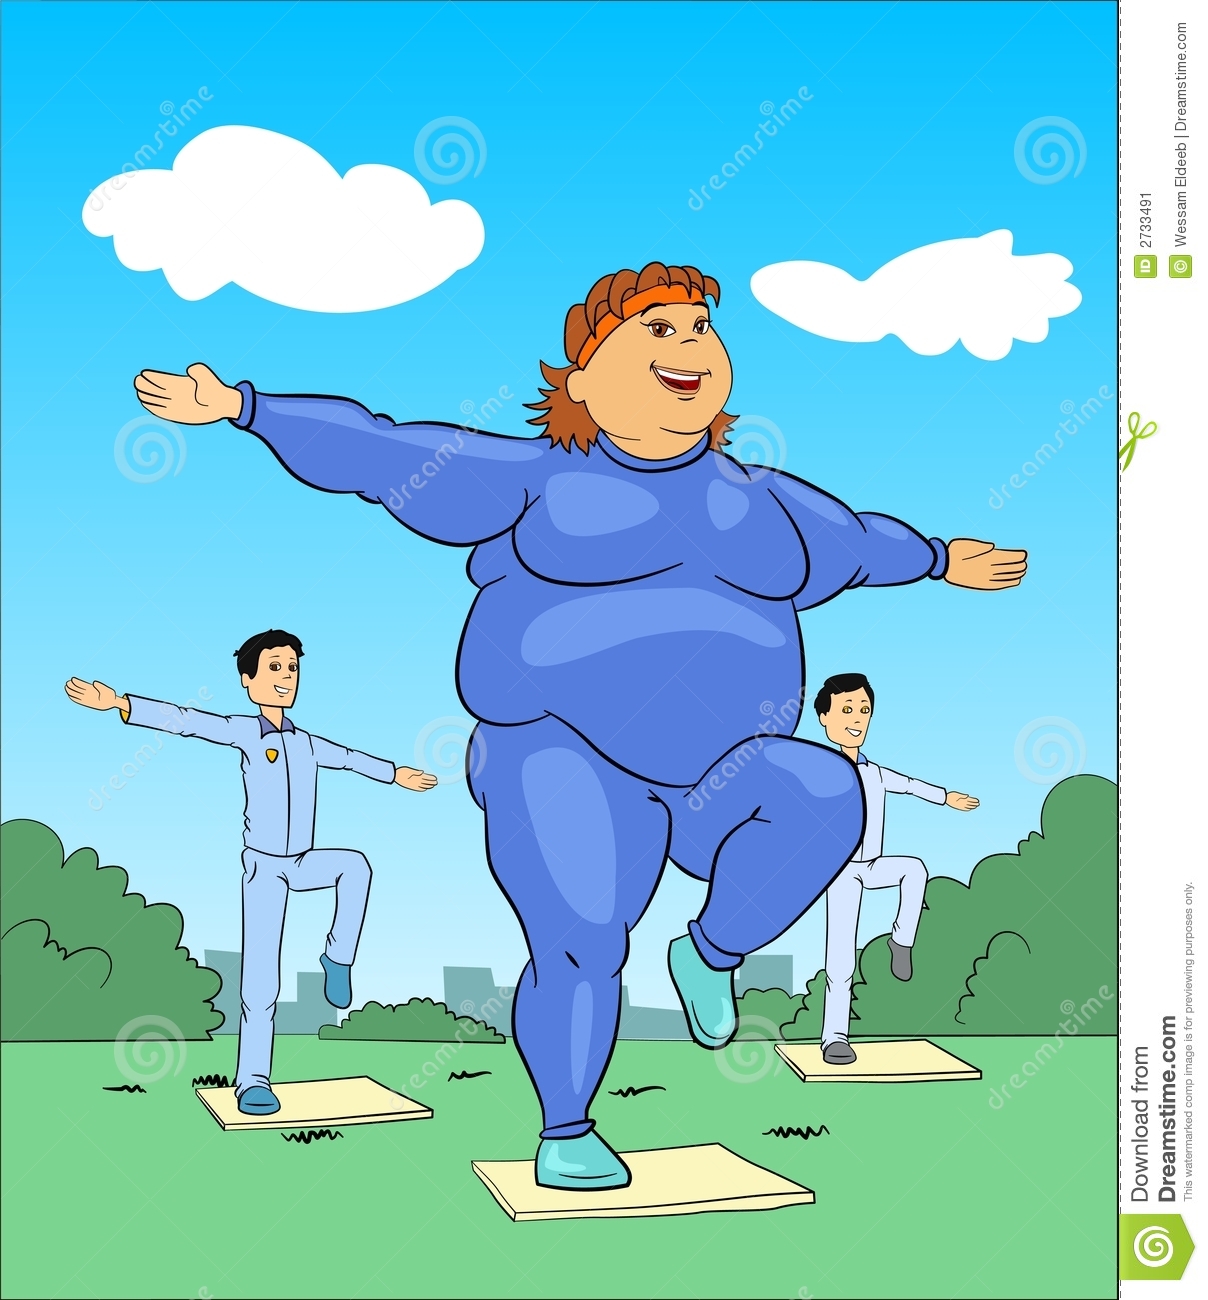 Of A Fat Lady Wearing A Blue Training Suit And Leading An Aerobics